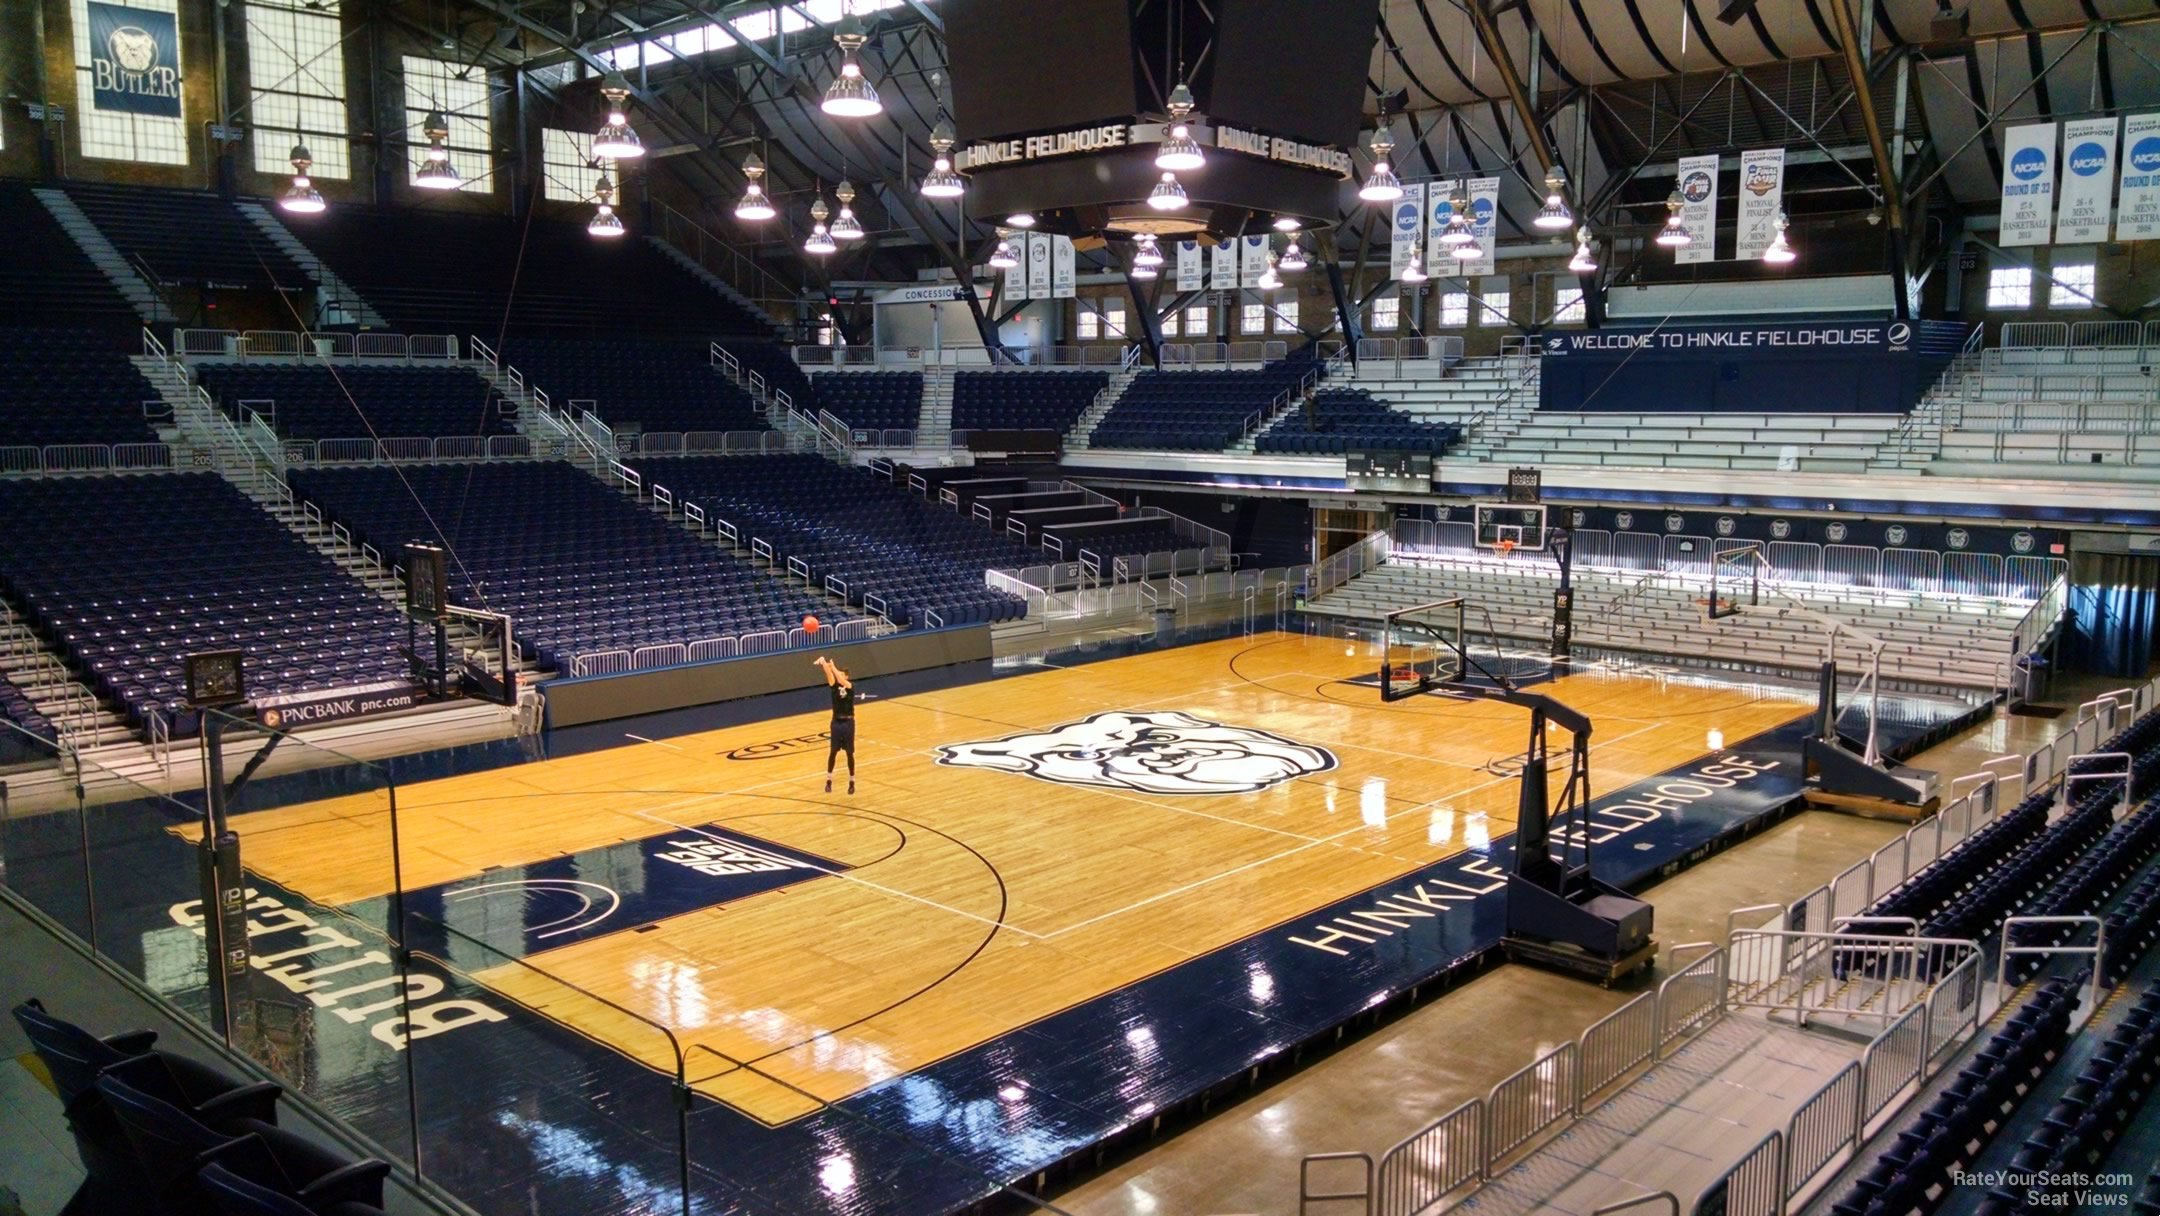 section 222, row 3 seat view  - hinkle fieldhouse